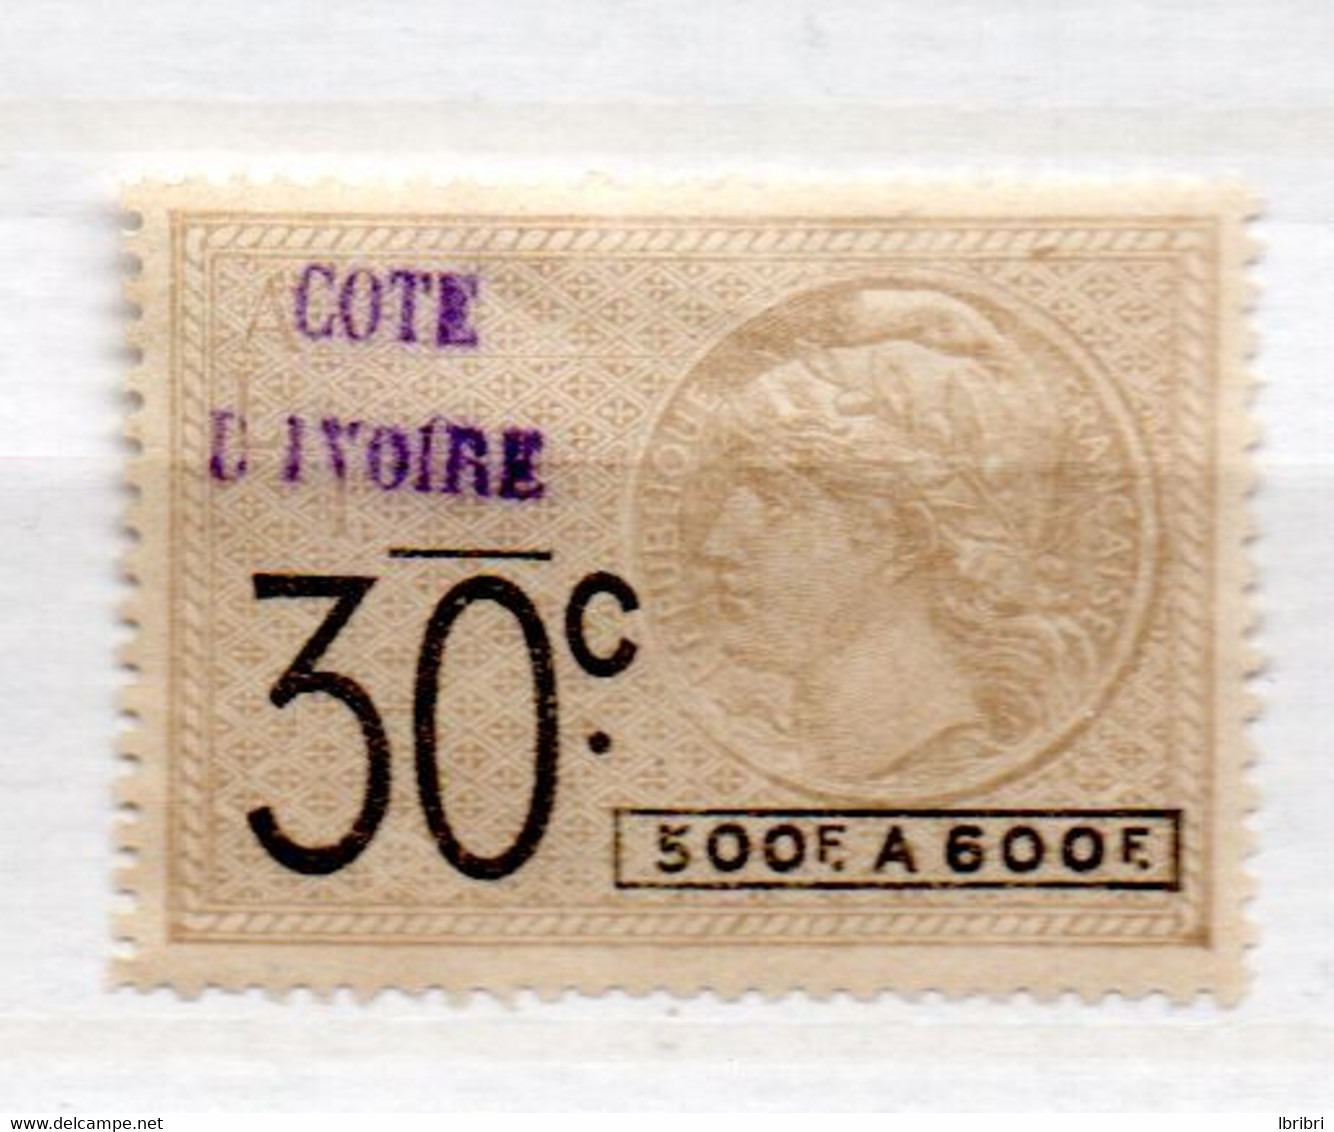 COTE D'IVOIRE 30C  GRIS CLAIR  TIMBRE FISCAL LEGENDE 500F A 600F NEUF SANS GOMME - Used Stamps